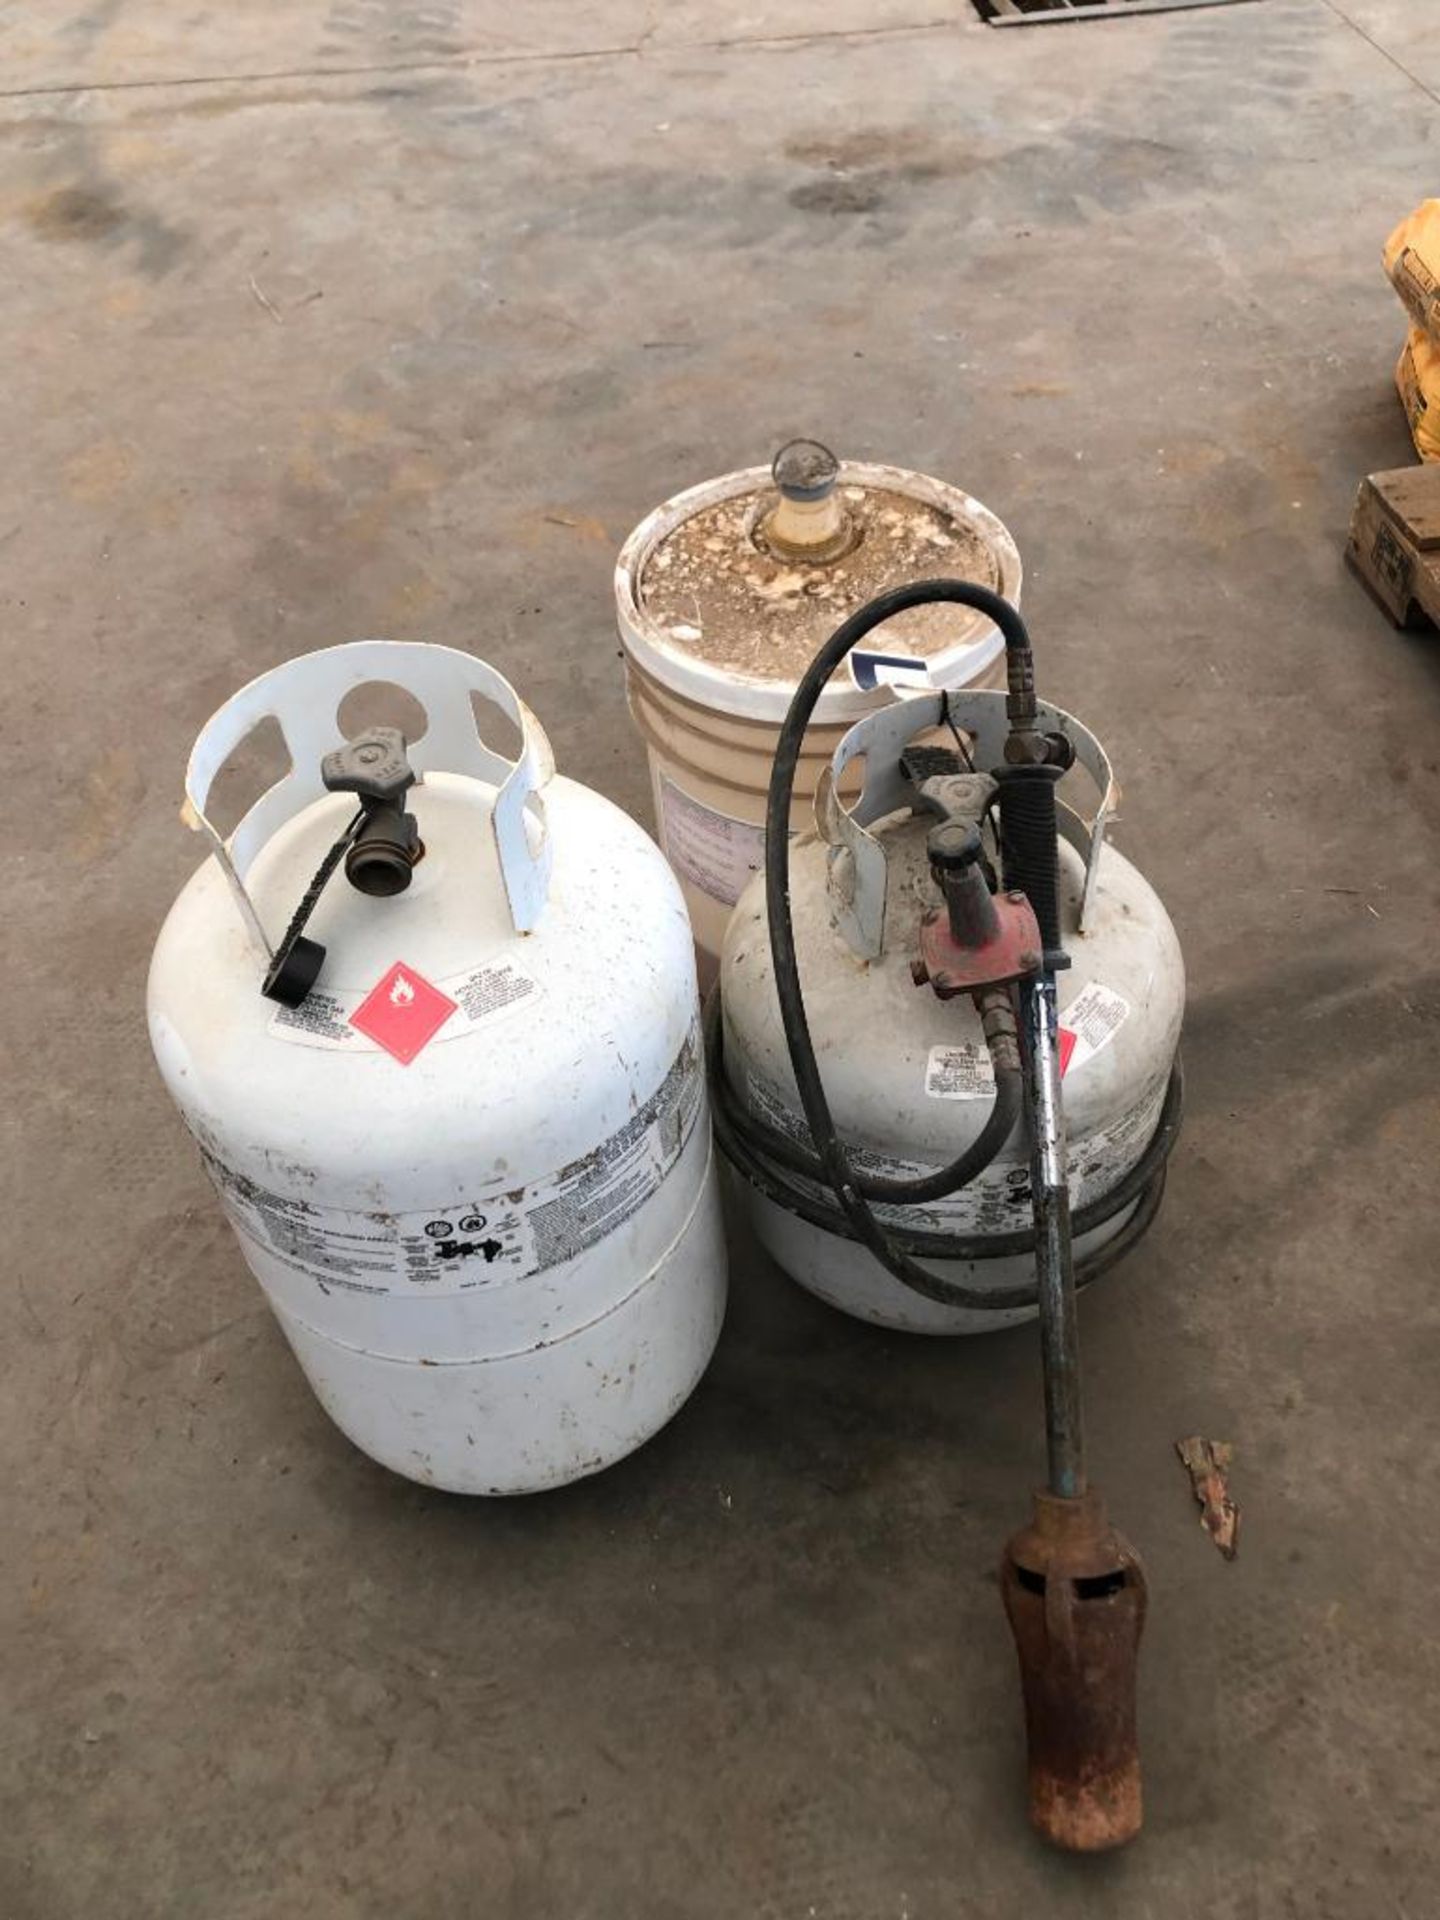 Lot of (2) Tiger Torches, 20lb LPG Tank and 30lb LPG Tank. - Image 3 of 3